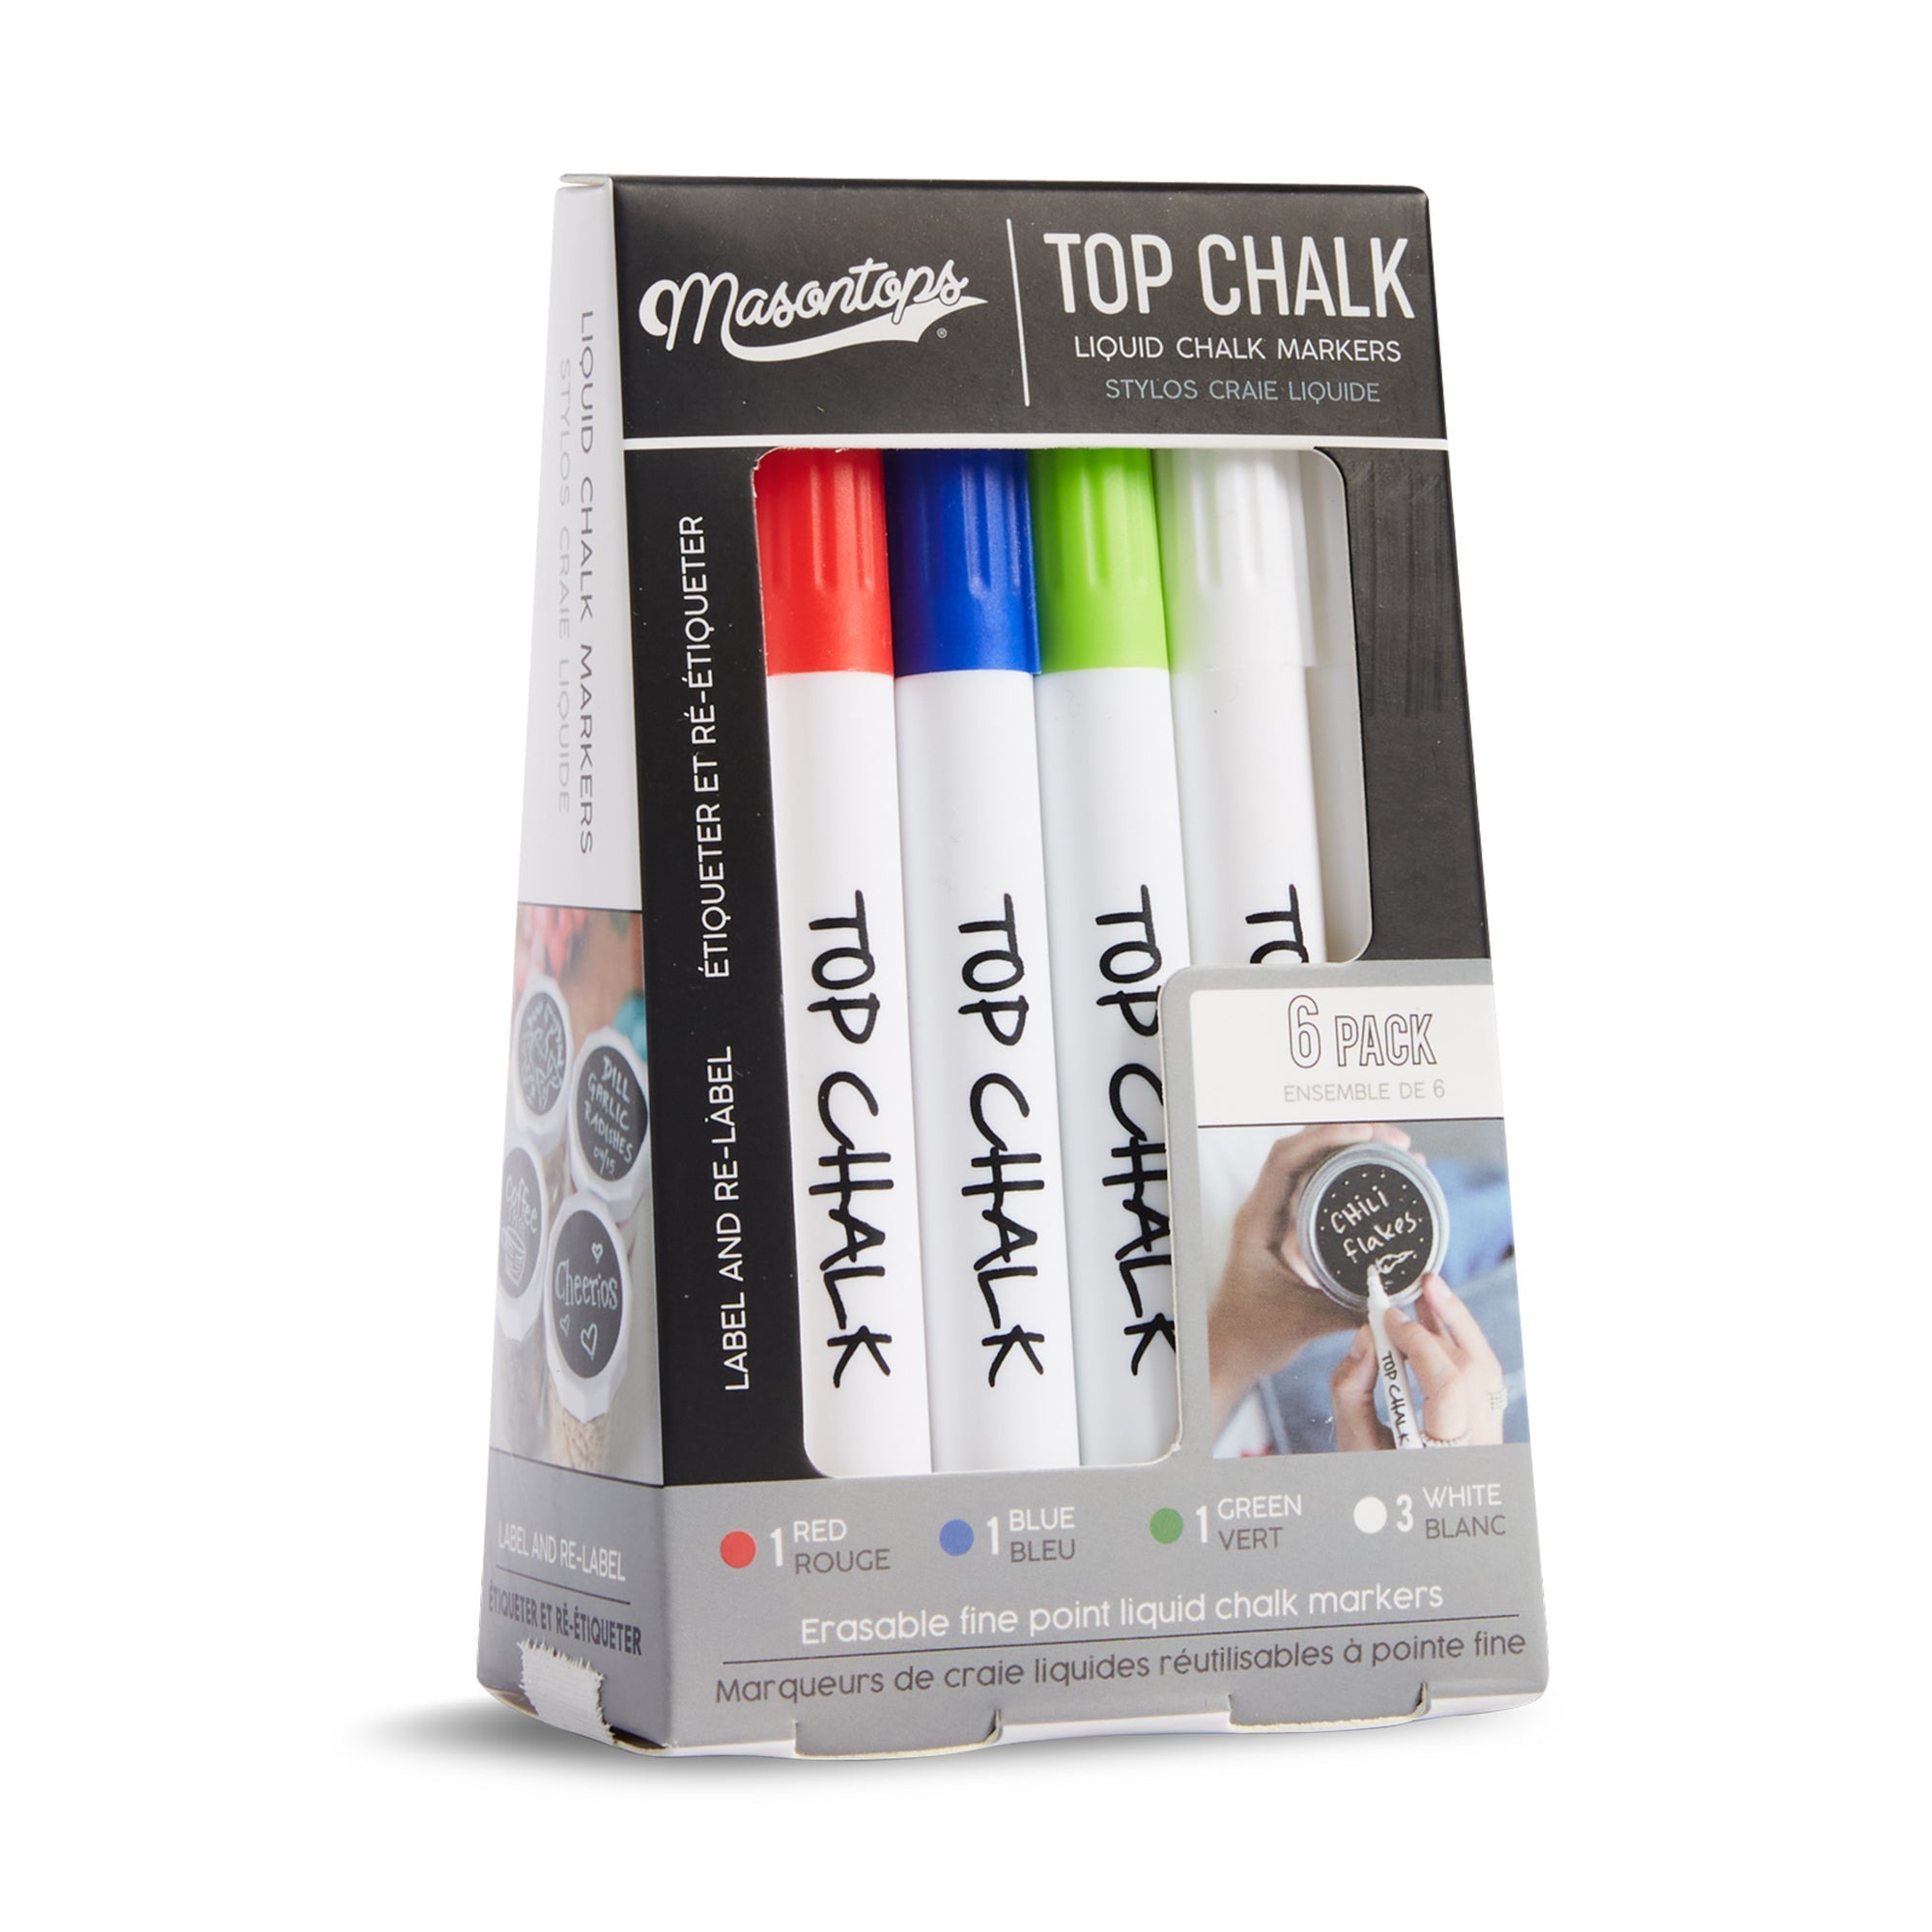 Masontops - Top Chalk Liquid Chalk Markers - all things being eco chilliwack